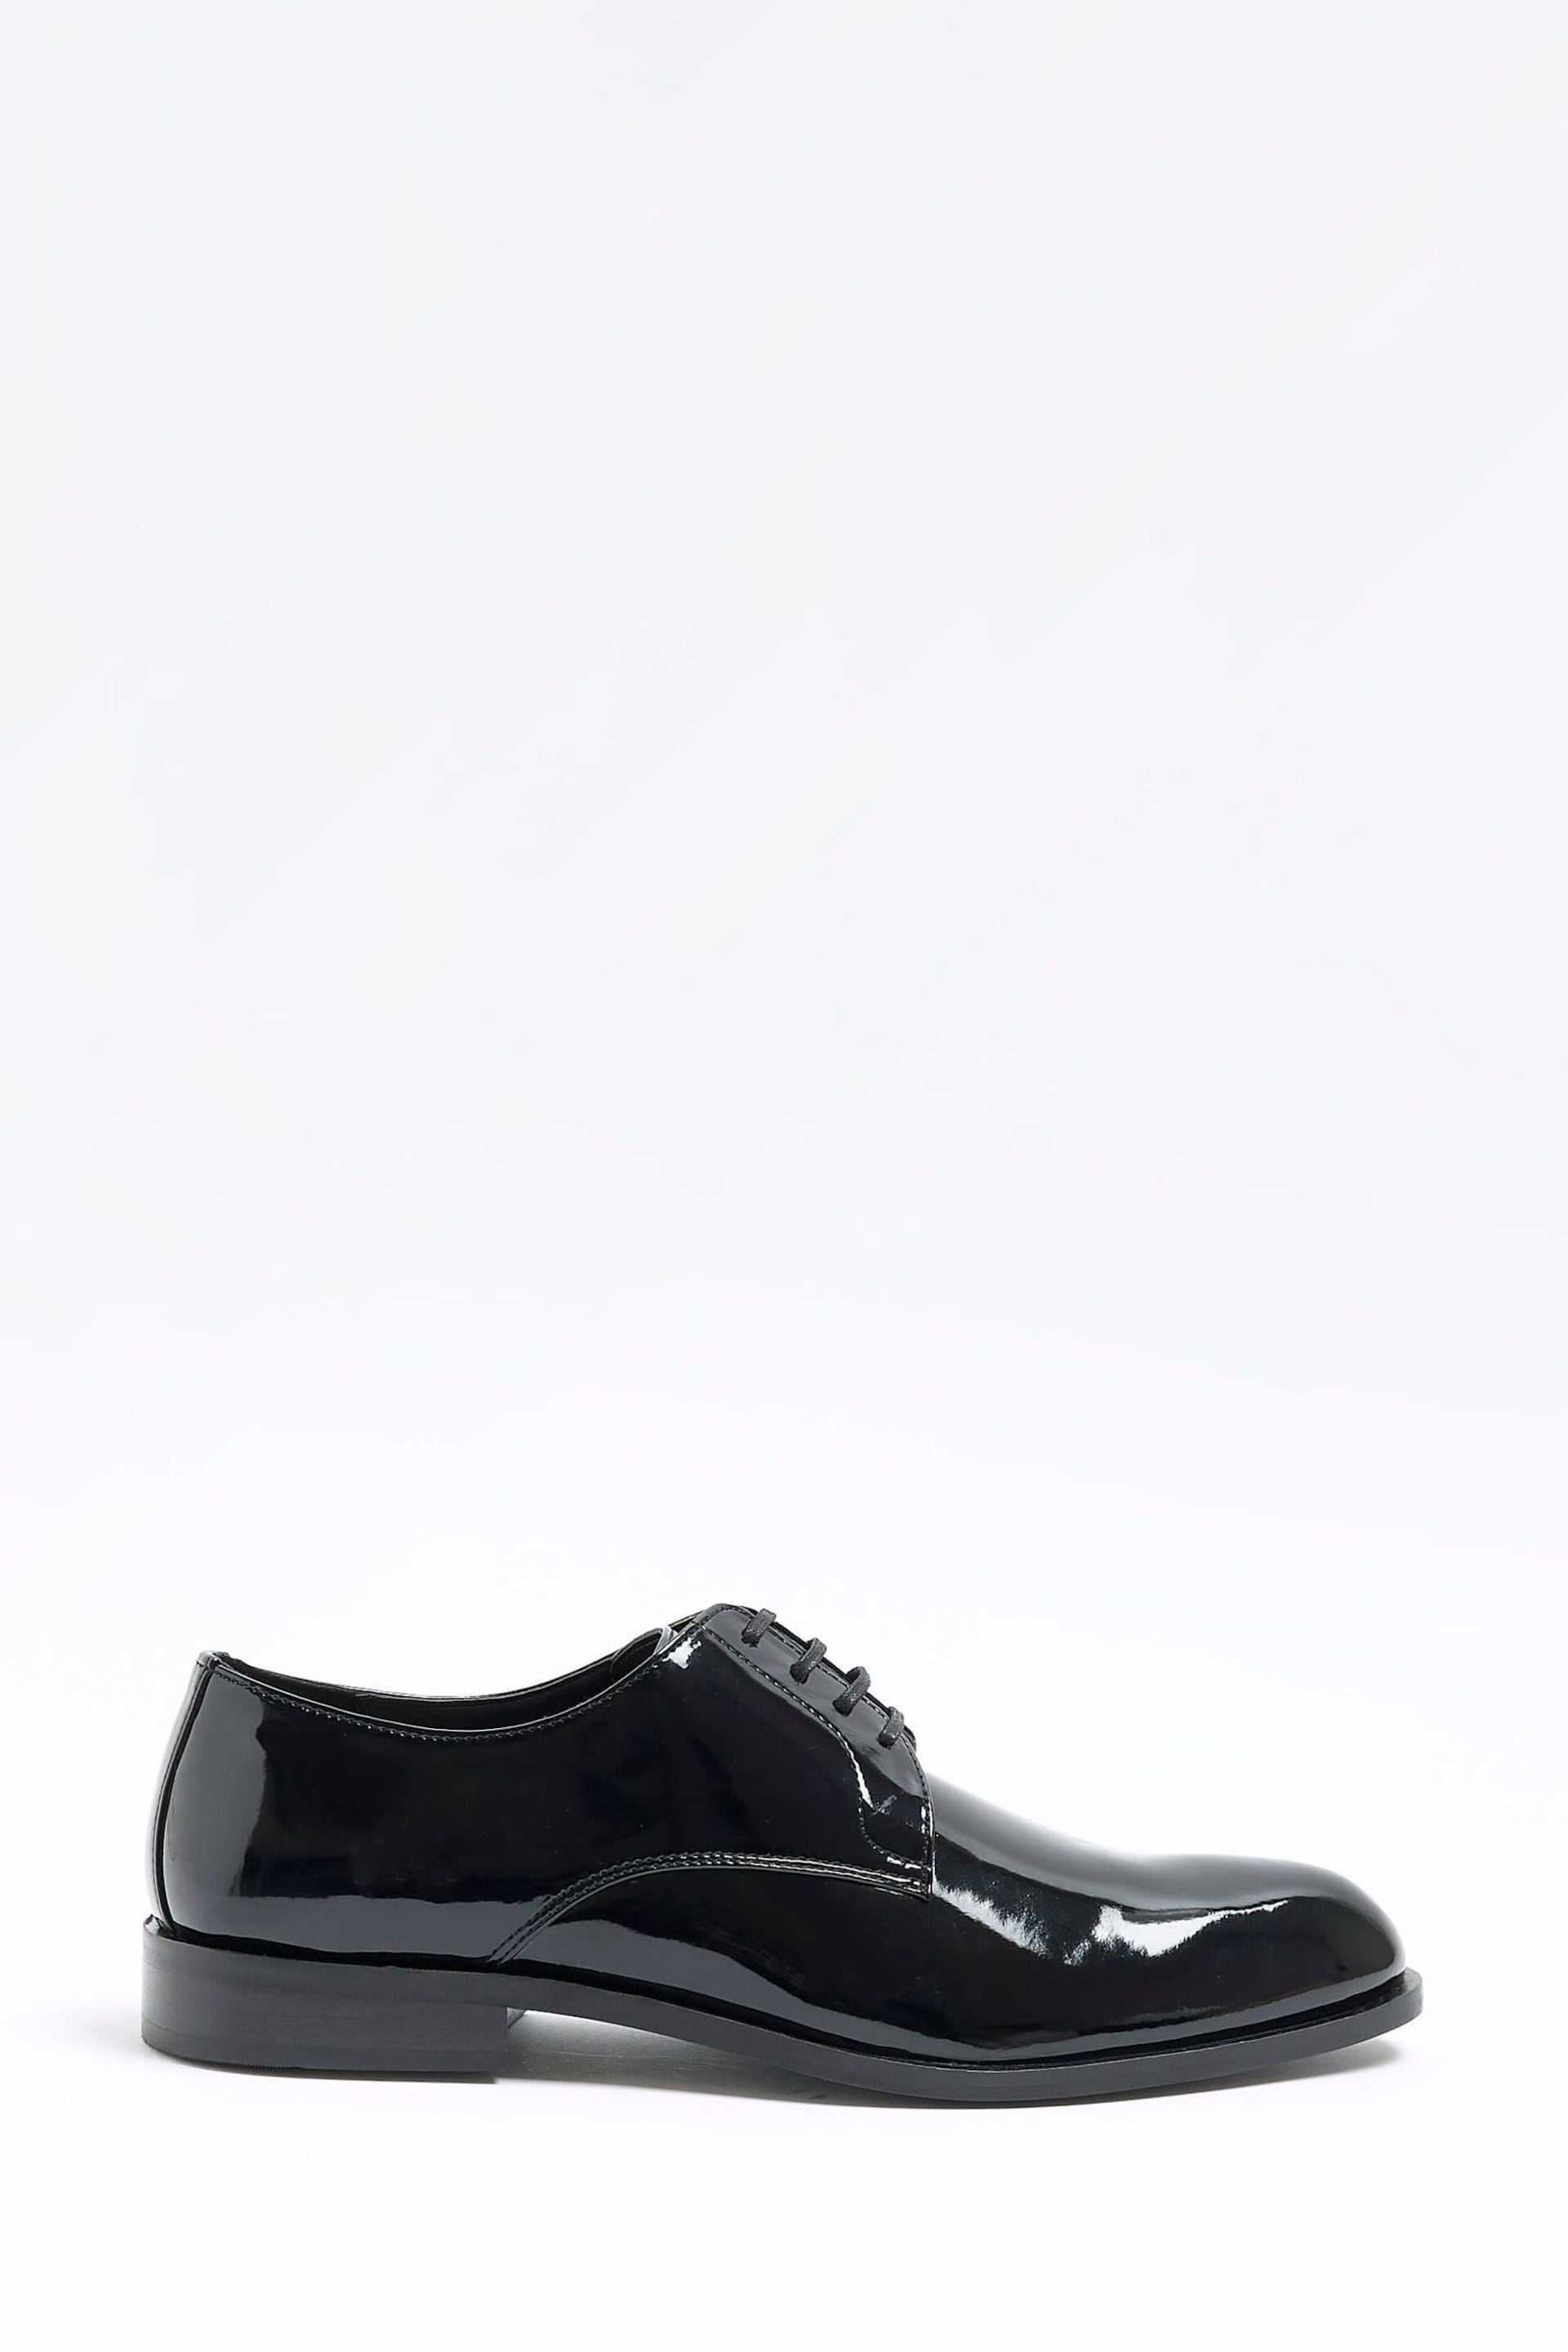 River Island Black Patent Derby Shoes - Image 1 of 4